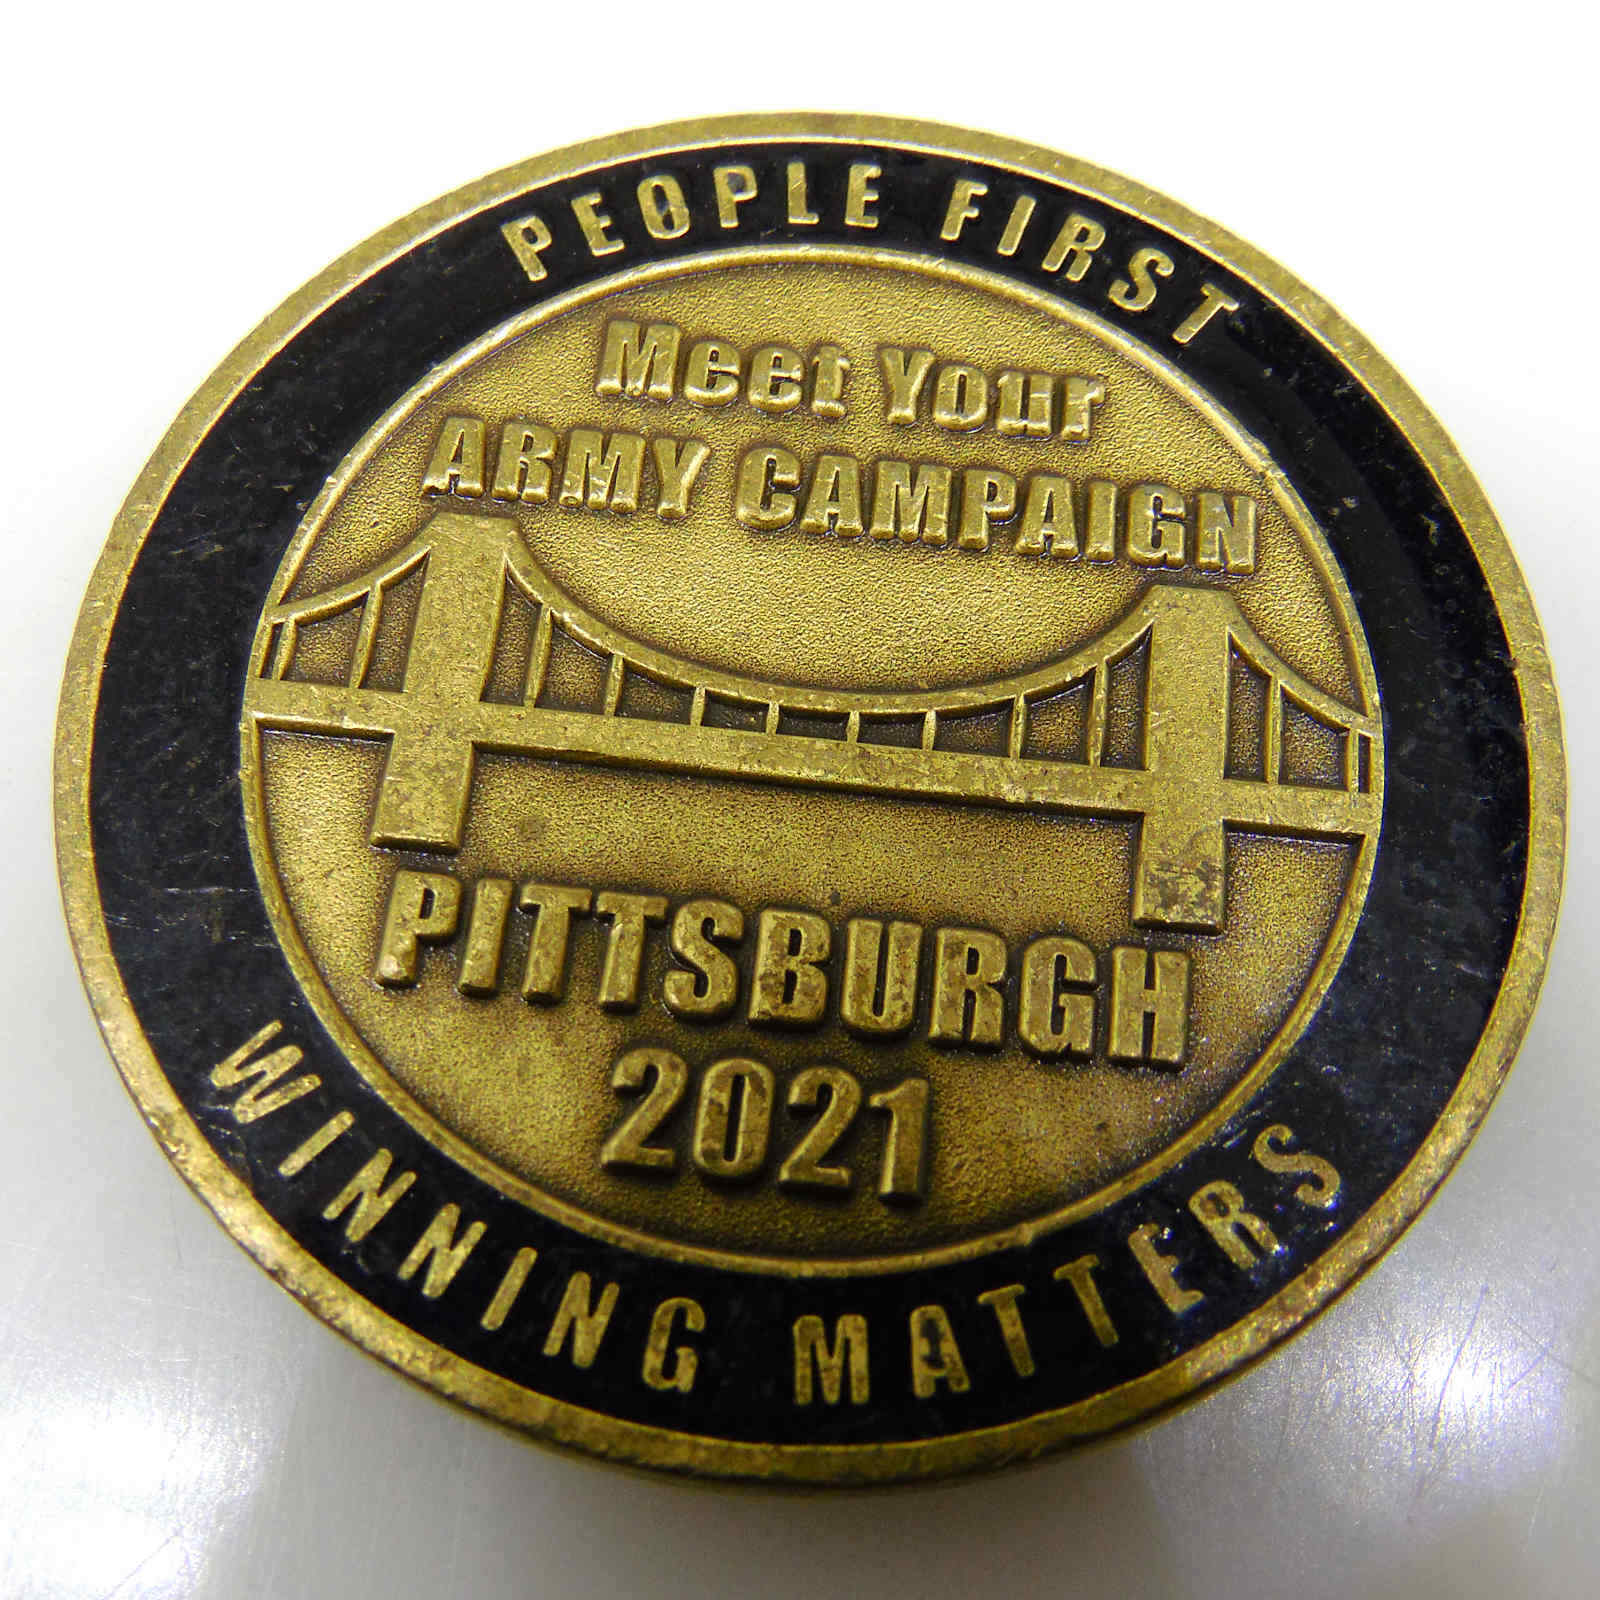 MEET YOUR ARMY CAMPAIGN PITTSBURGH 2021 CHALLENGE COIN